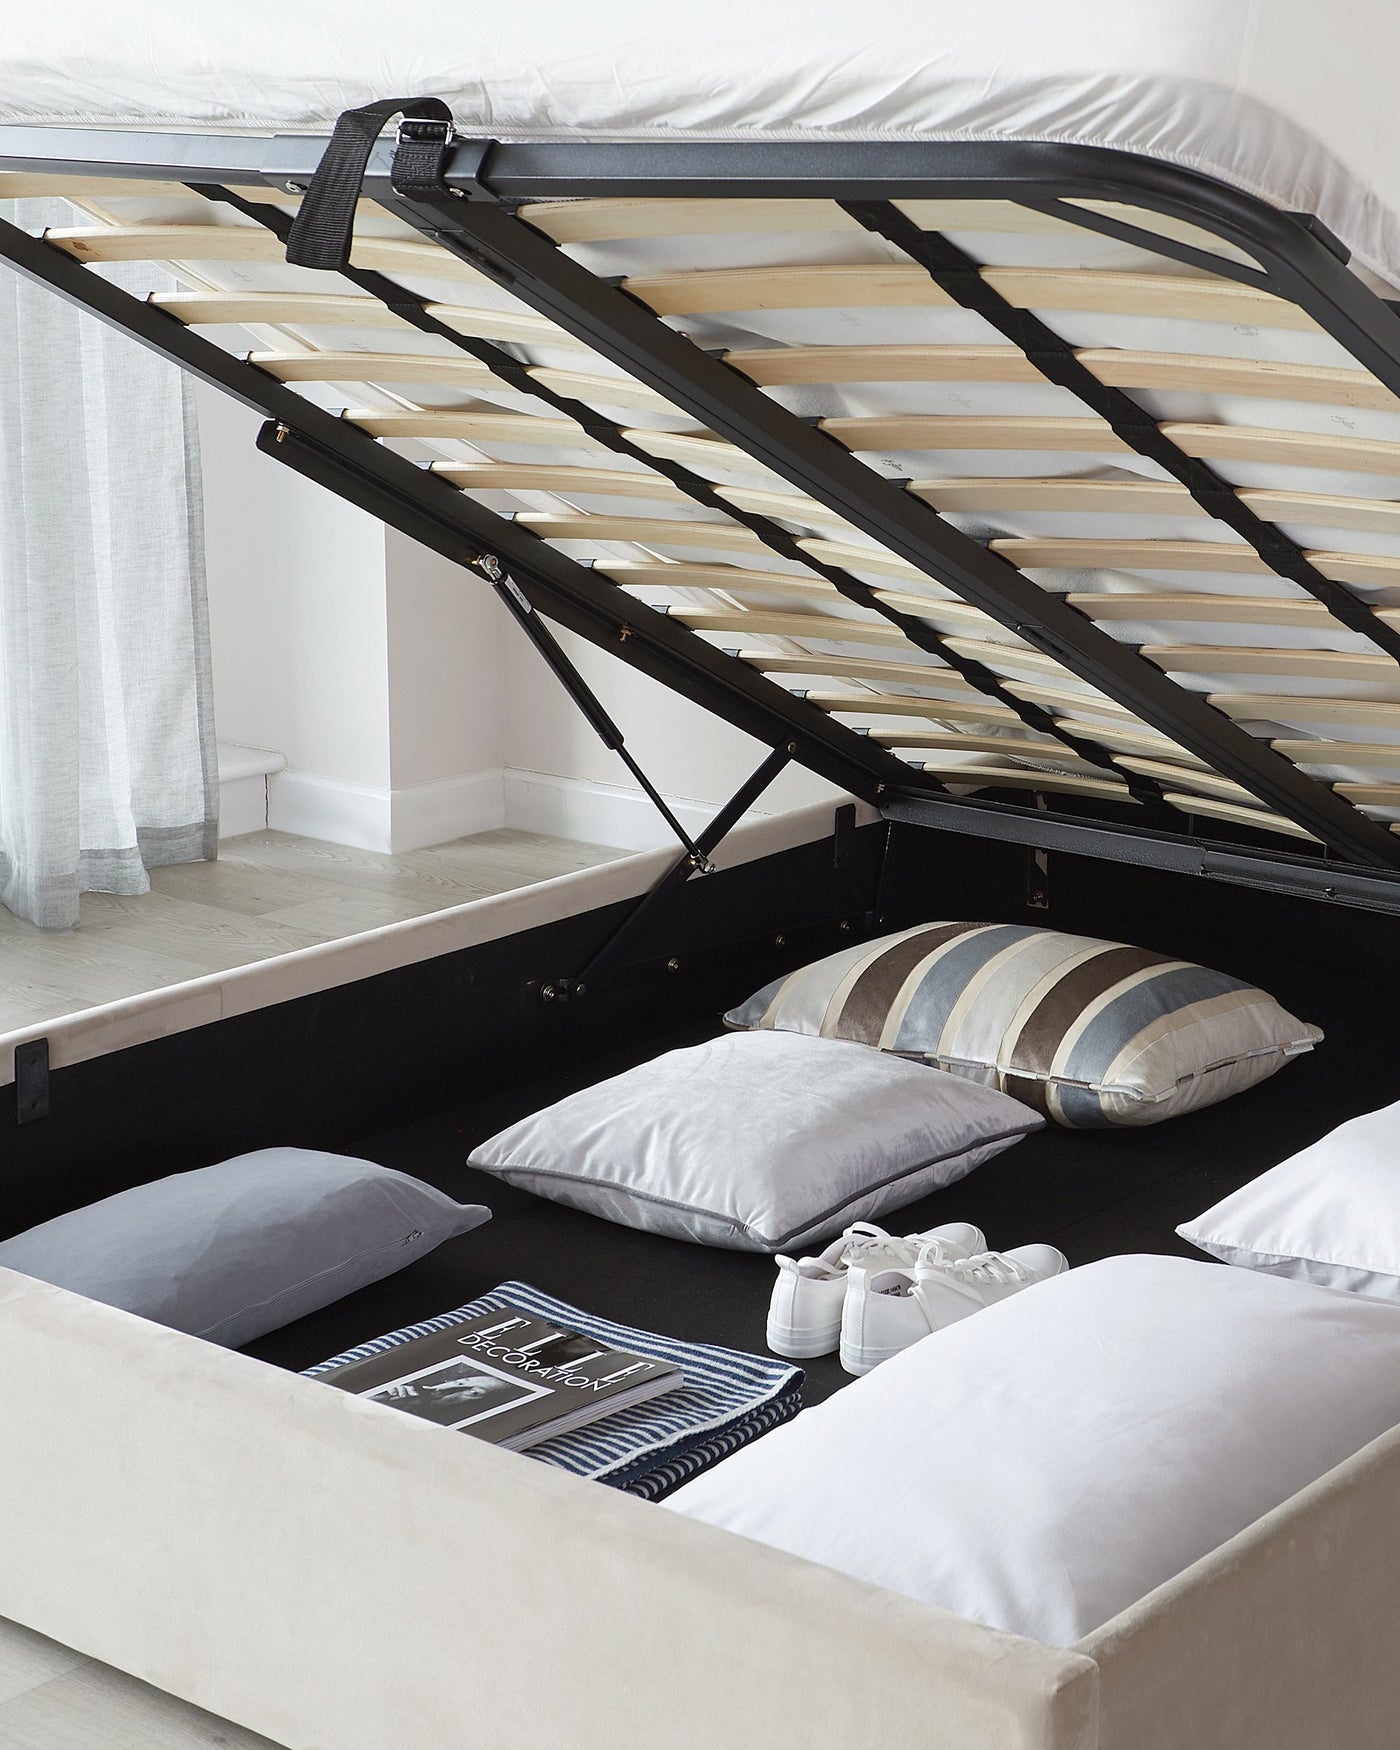 Beige upholstered storage bed with a lifted base revealing a spacious storage compartment underneath, featuring a black flooring base and a wooden slat support system.